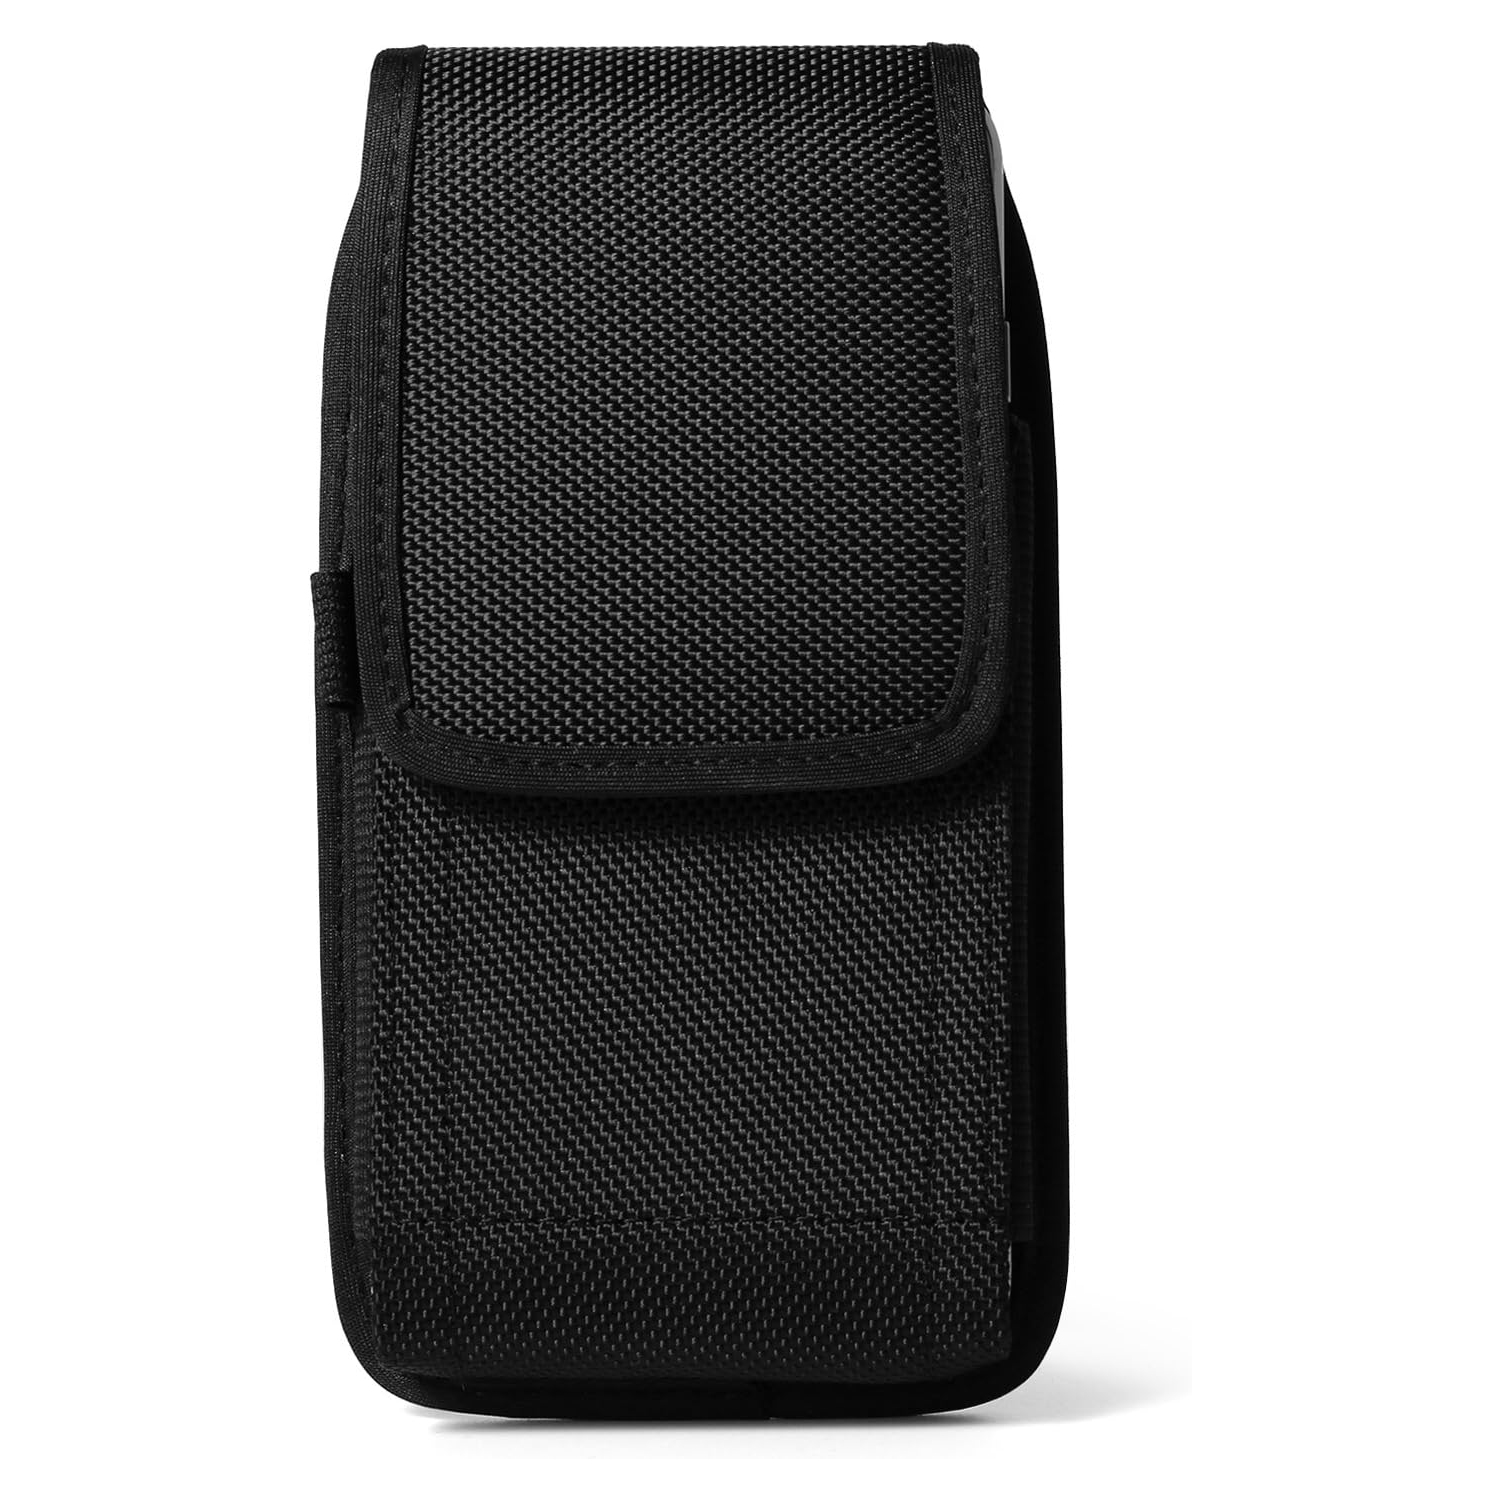 Rugged Nylon Vertical Belt Clip Holster Case for Samsung Galaxy S9+ S9 S8+ S8 / Note 8 / A5 A7 J5 J7 / Nokia 7 Plus 5 6